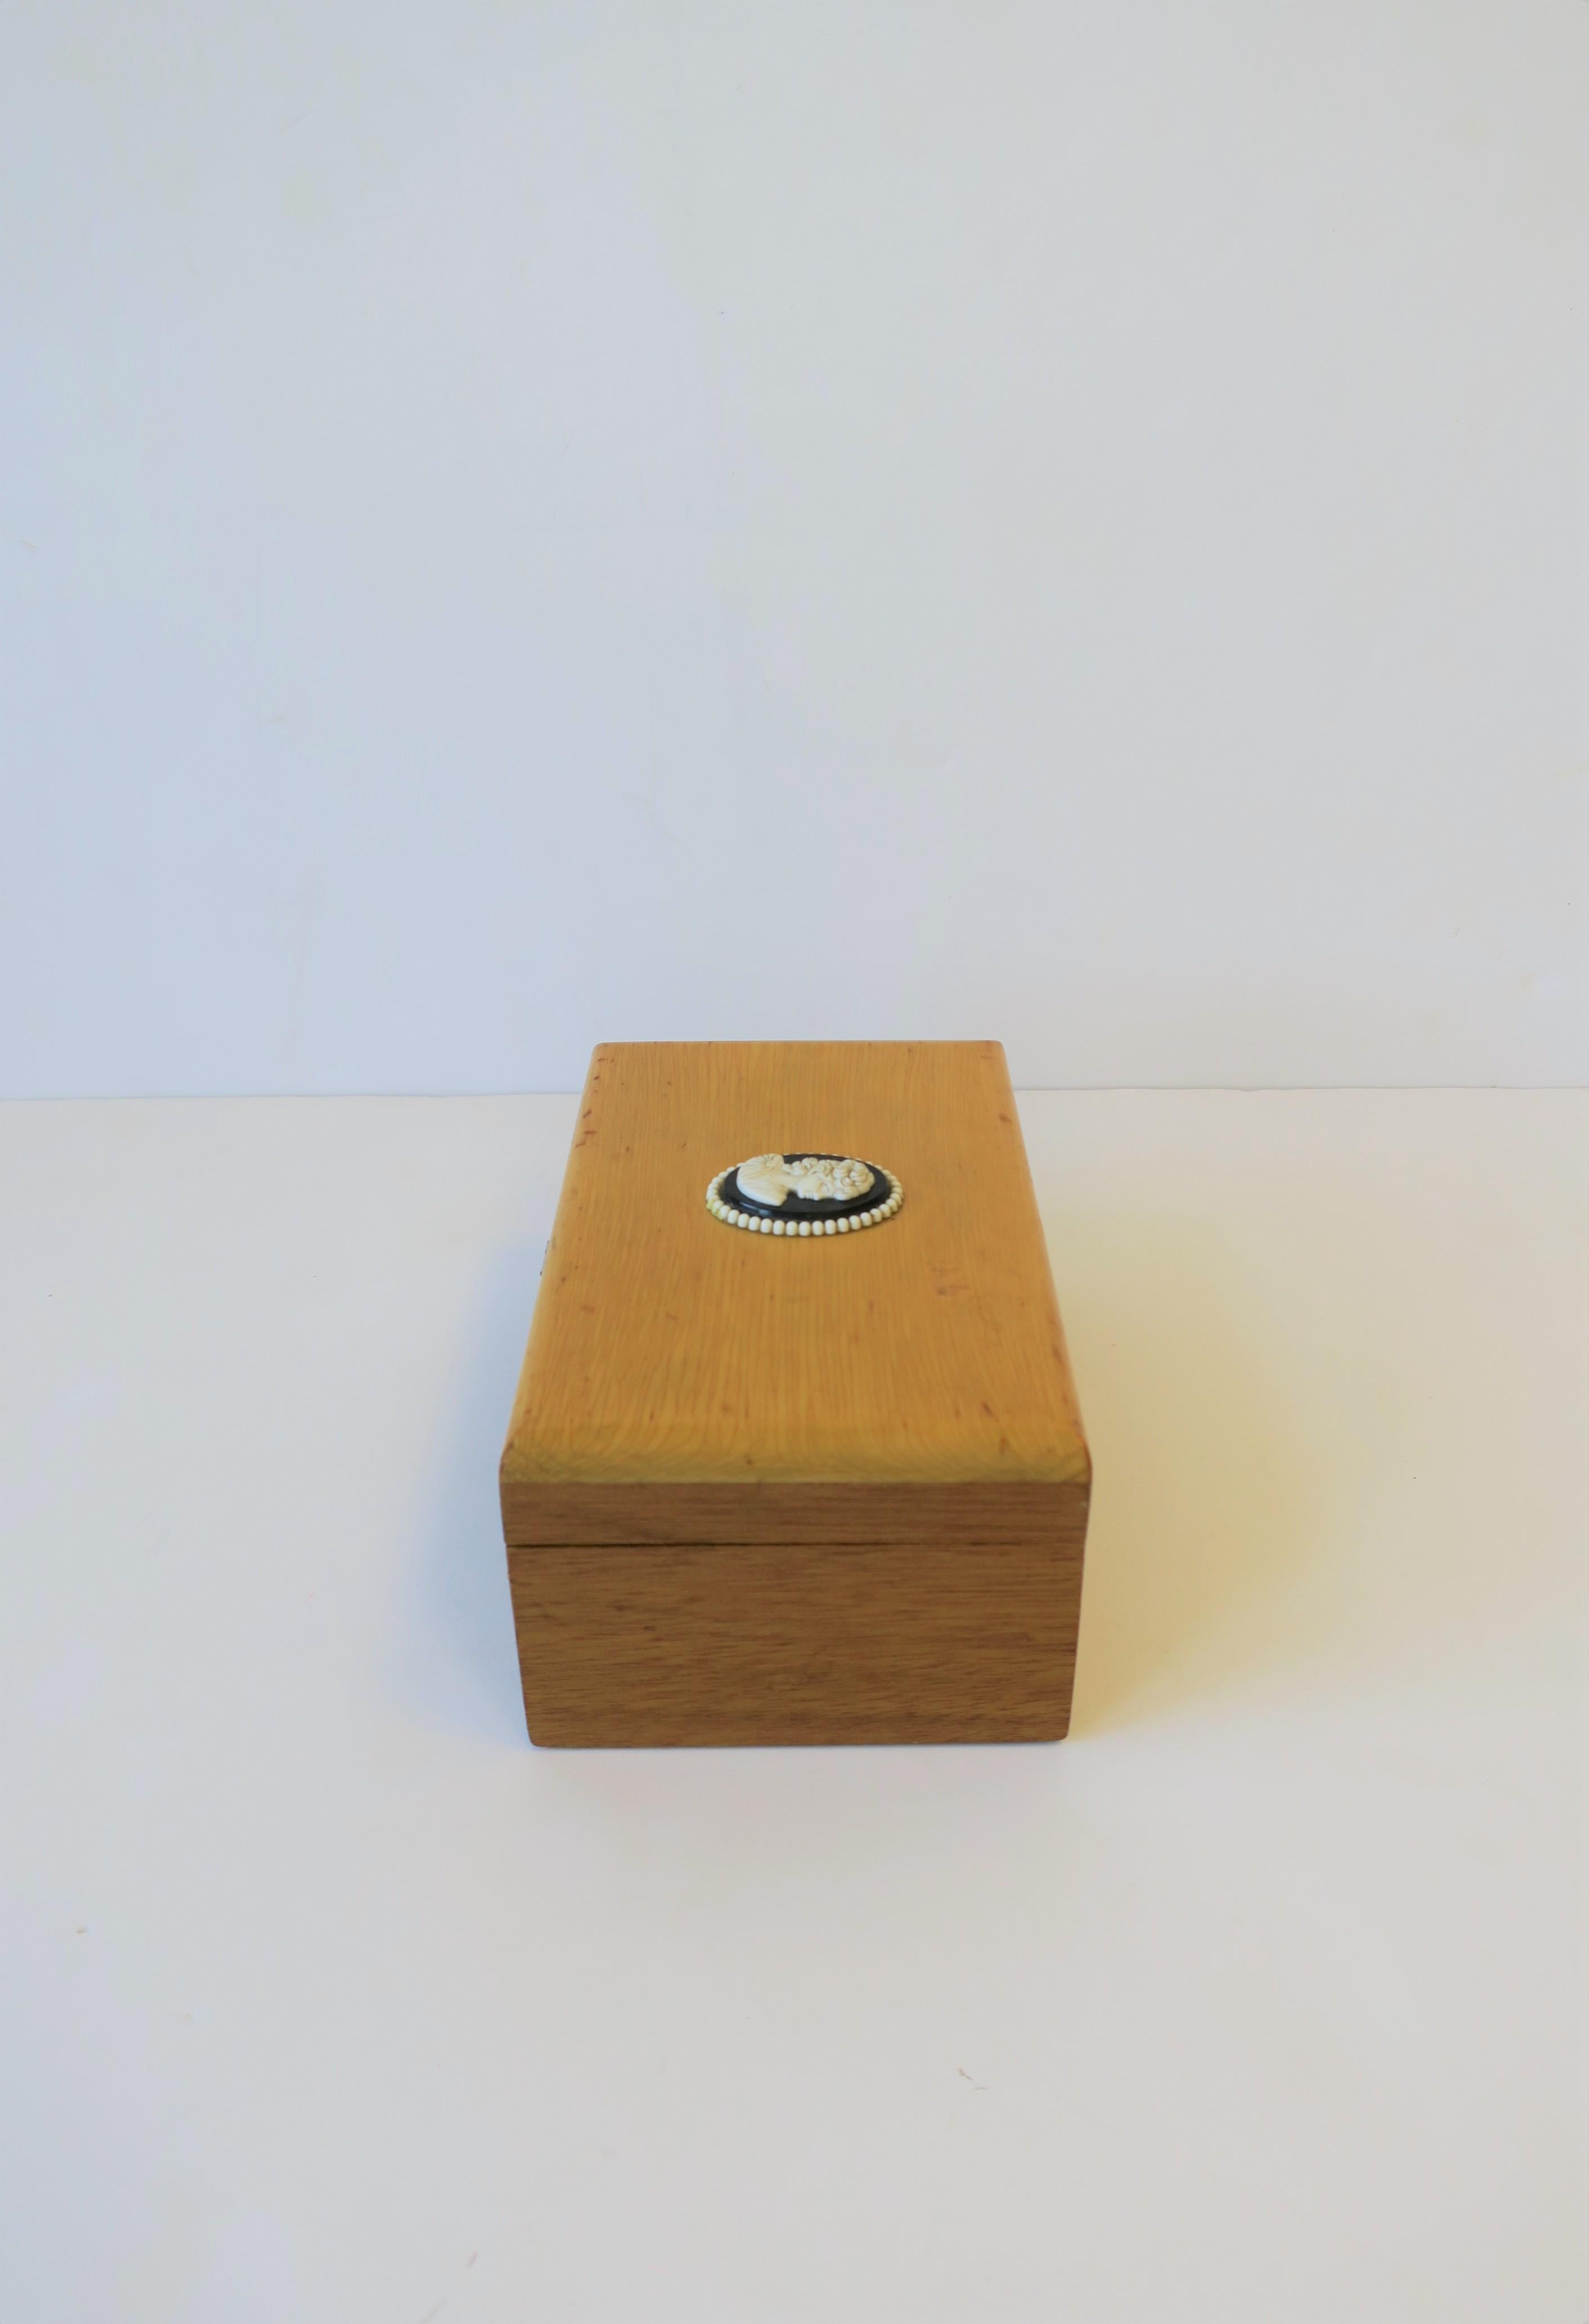 Wood Box with Black and White Cameo Design For Sale